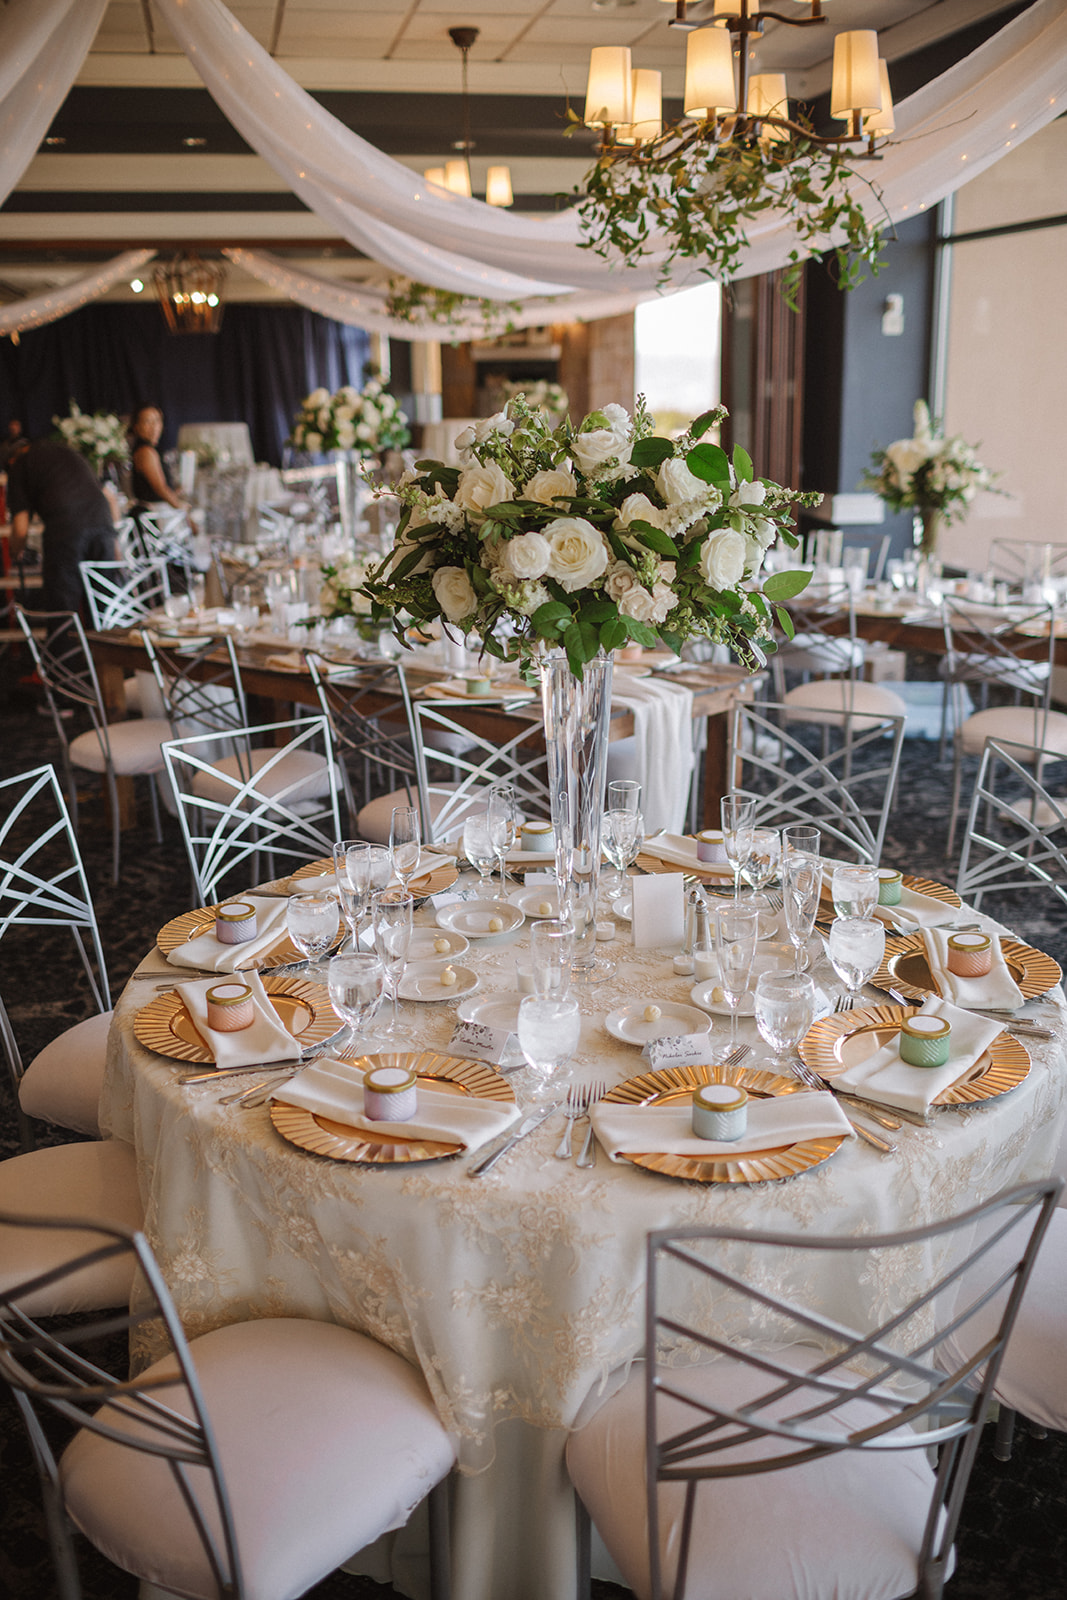 Fairytale Revere Country Club Wedding Tablescape with White Rose Centerpiece 